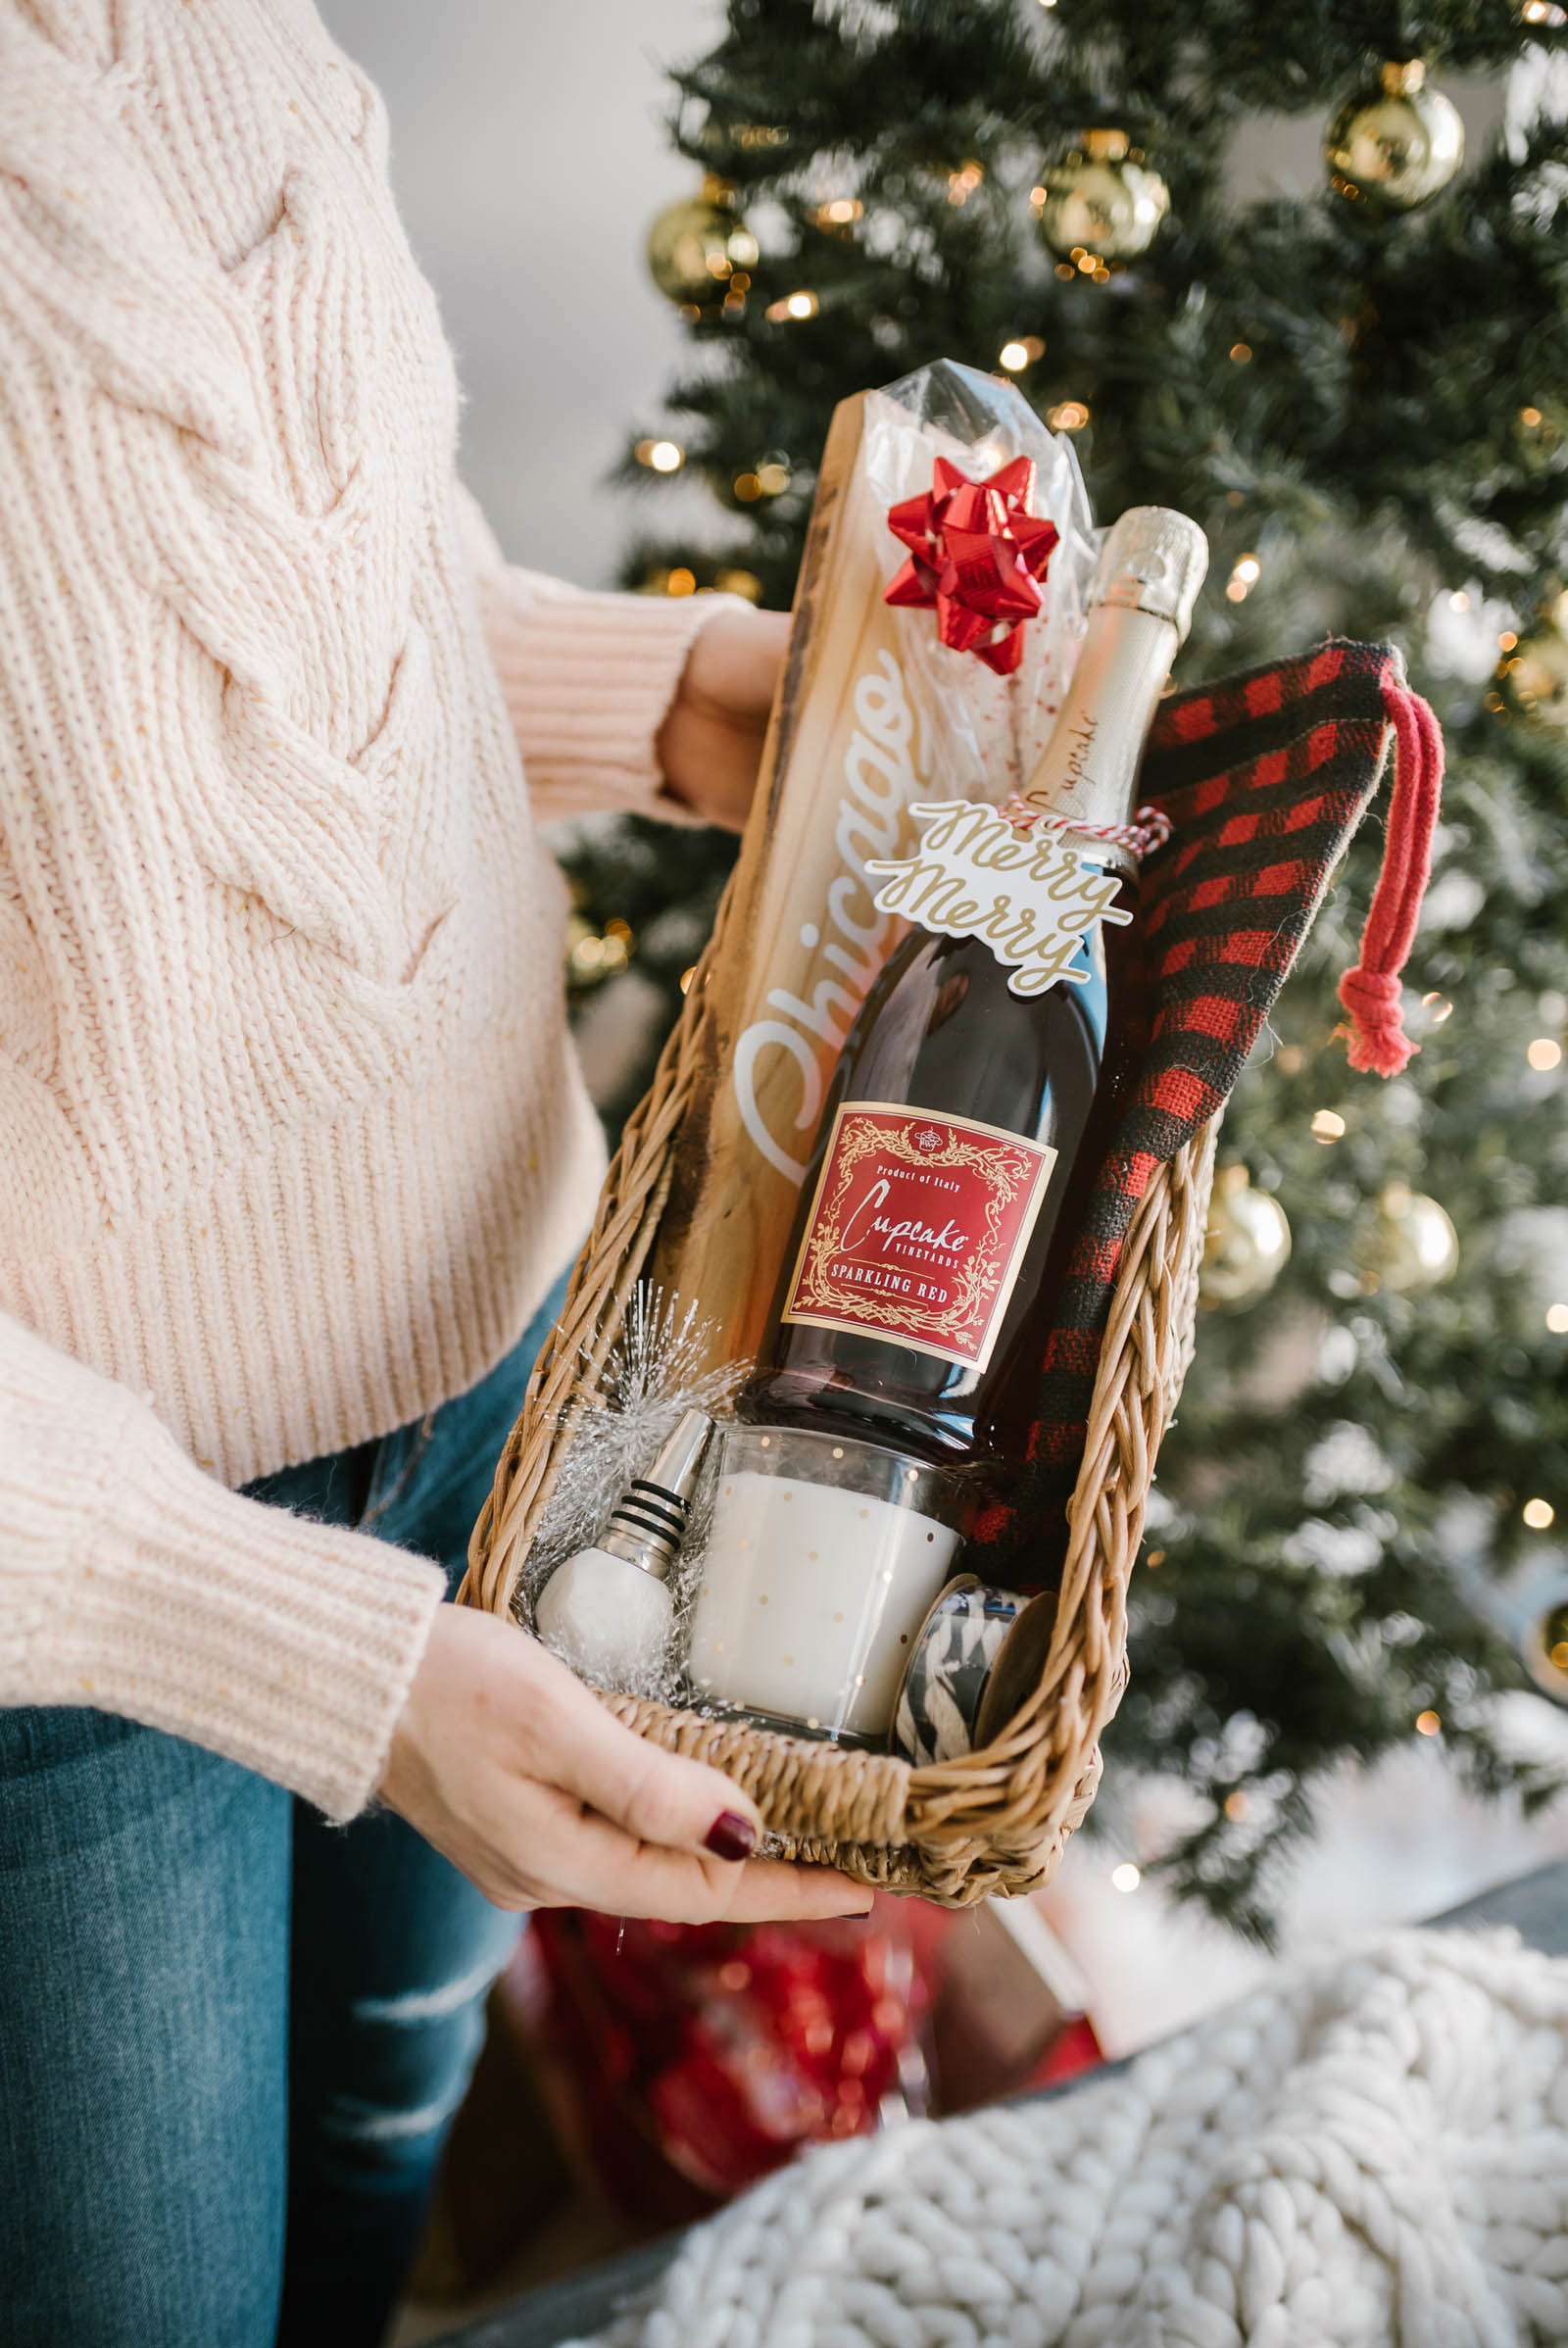 DIY Gift Baskets Ideas For Christmas
 Last Minute Holiday Idea Easy Homemade Gift Baskets